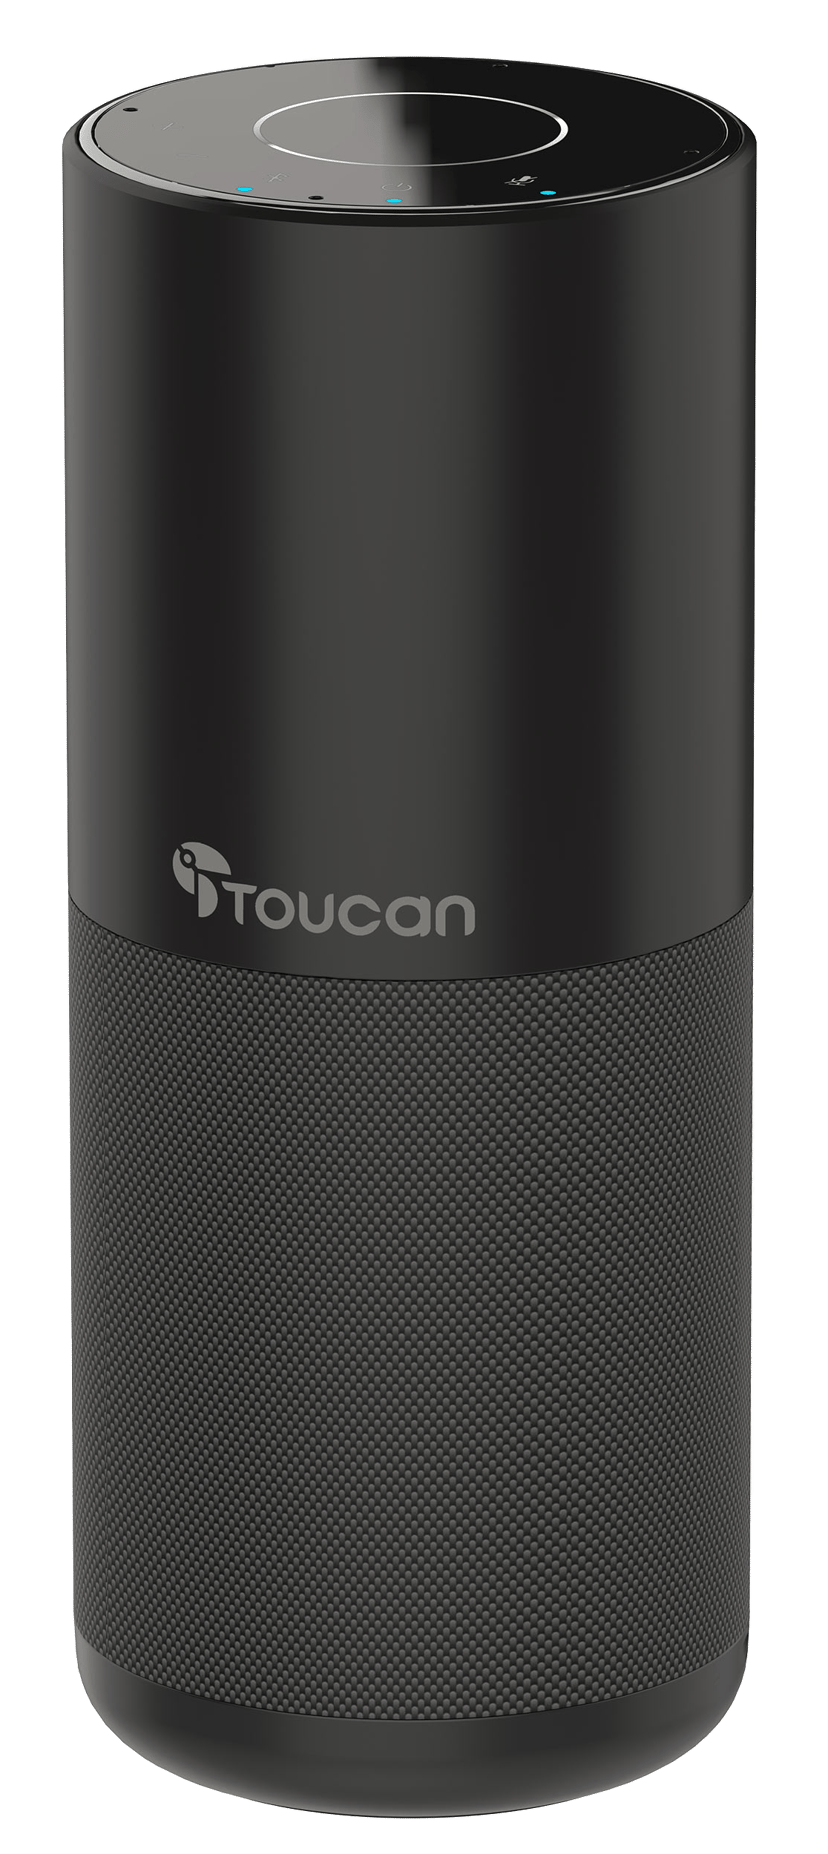 TOUCAN Connect Video Conference System HD